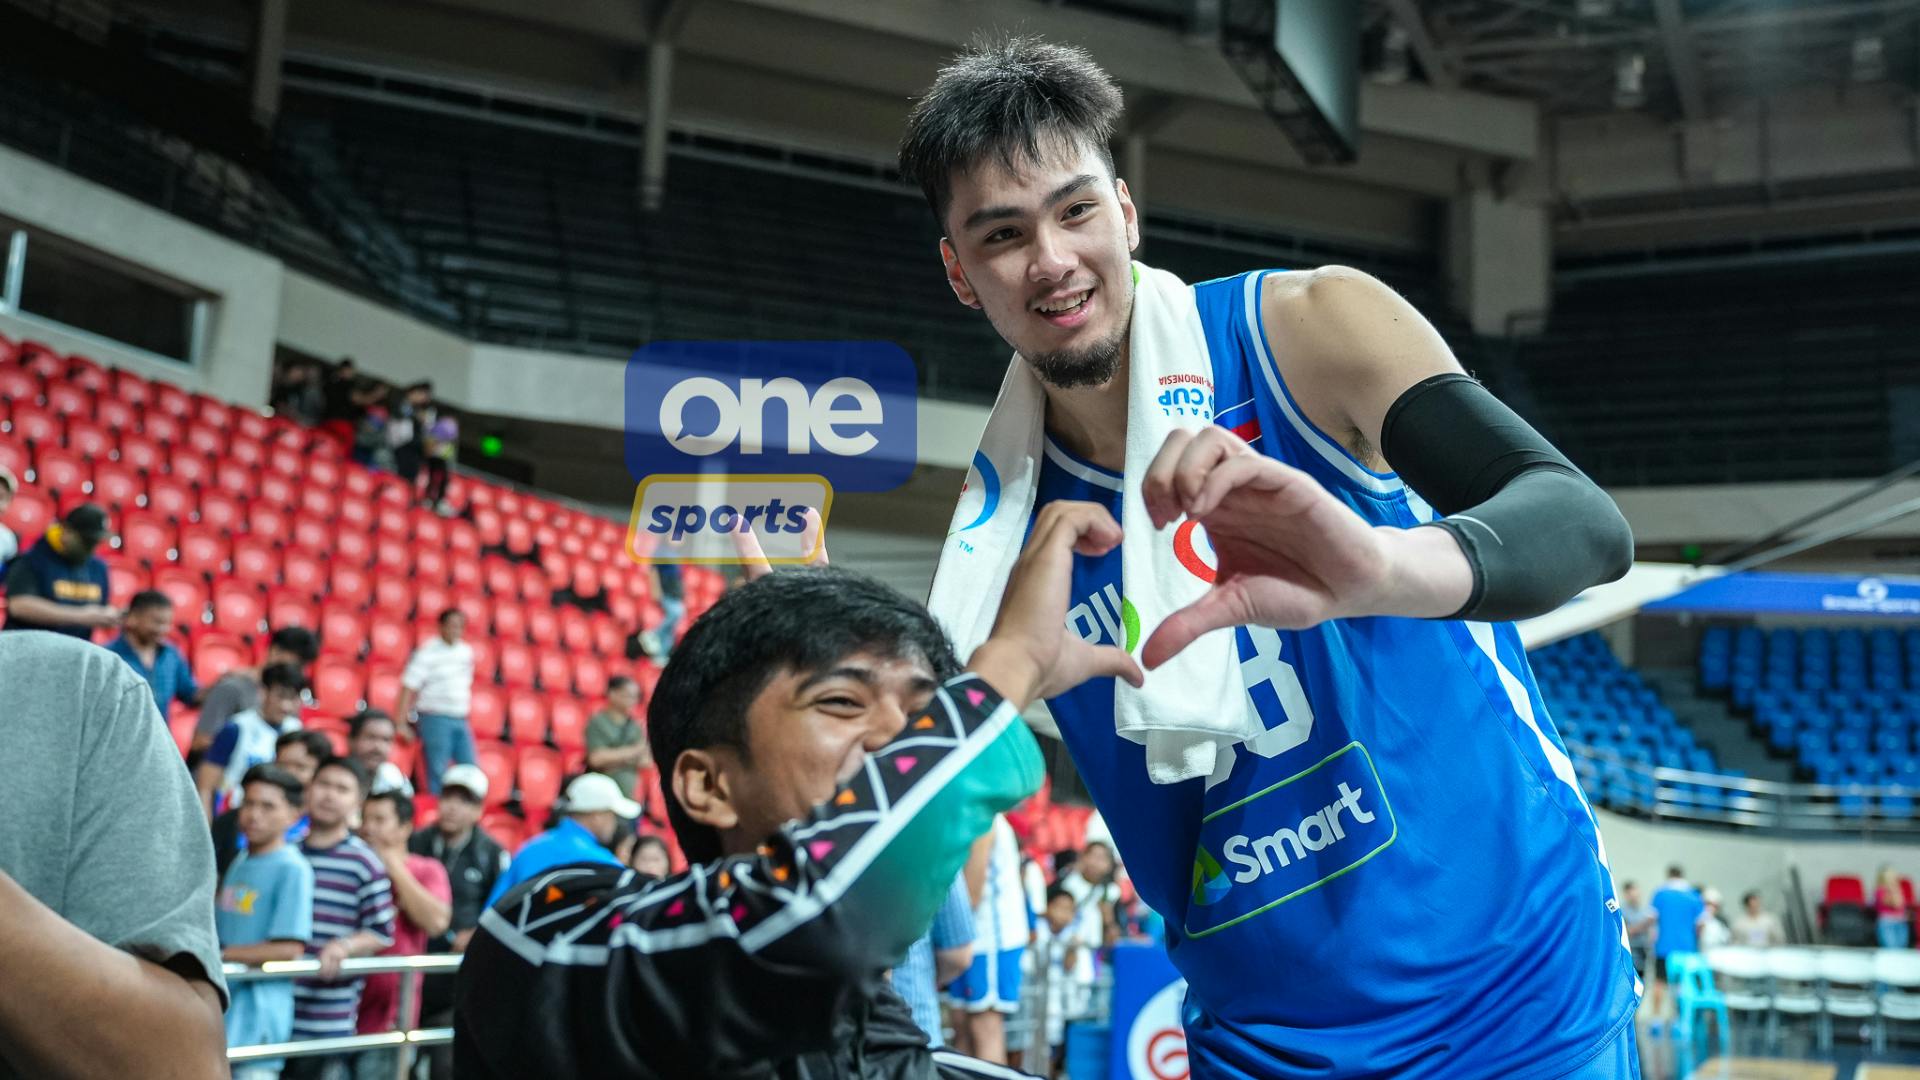 Gilas Pilipinas *ginulat* ang fans with a wholesome In Photos session